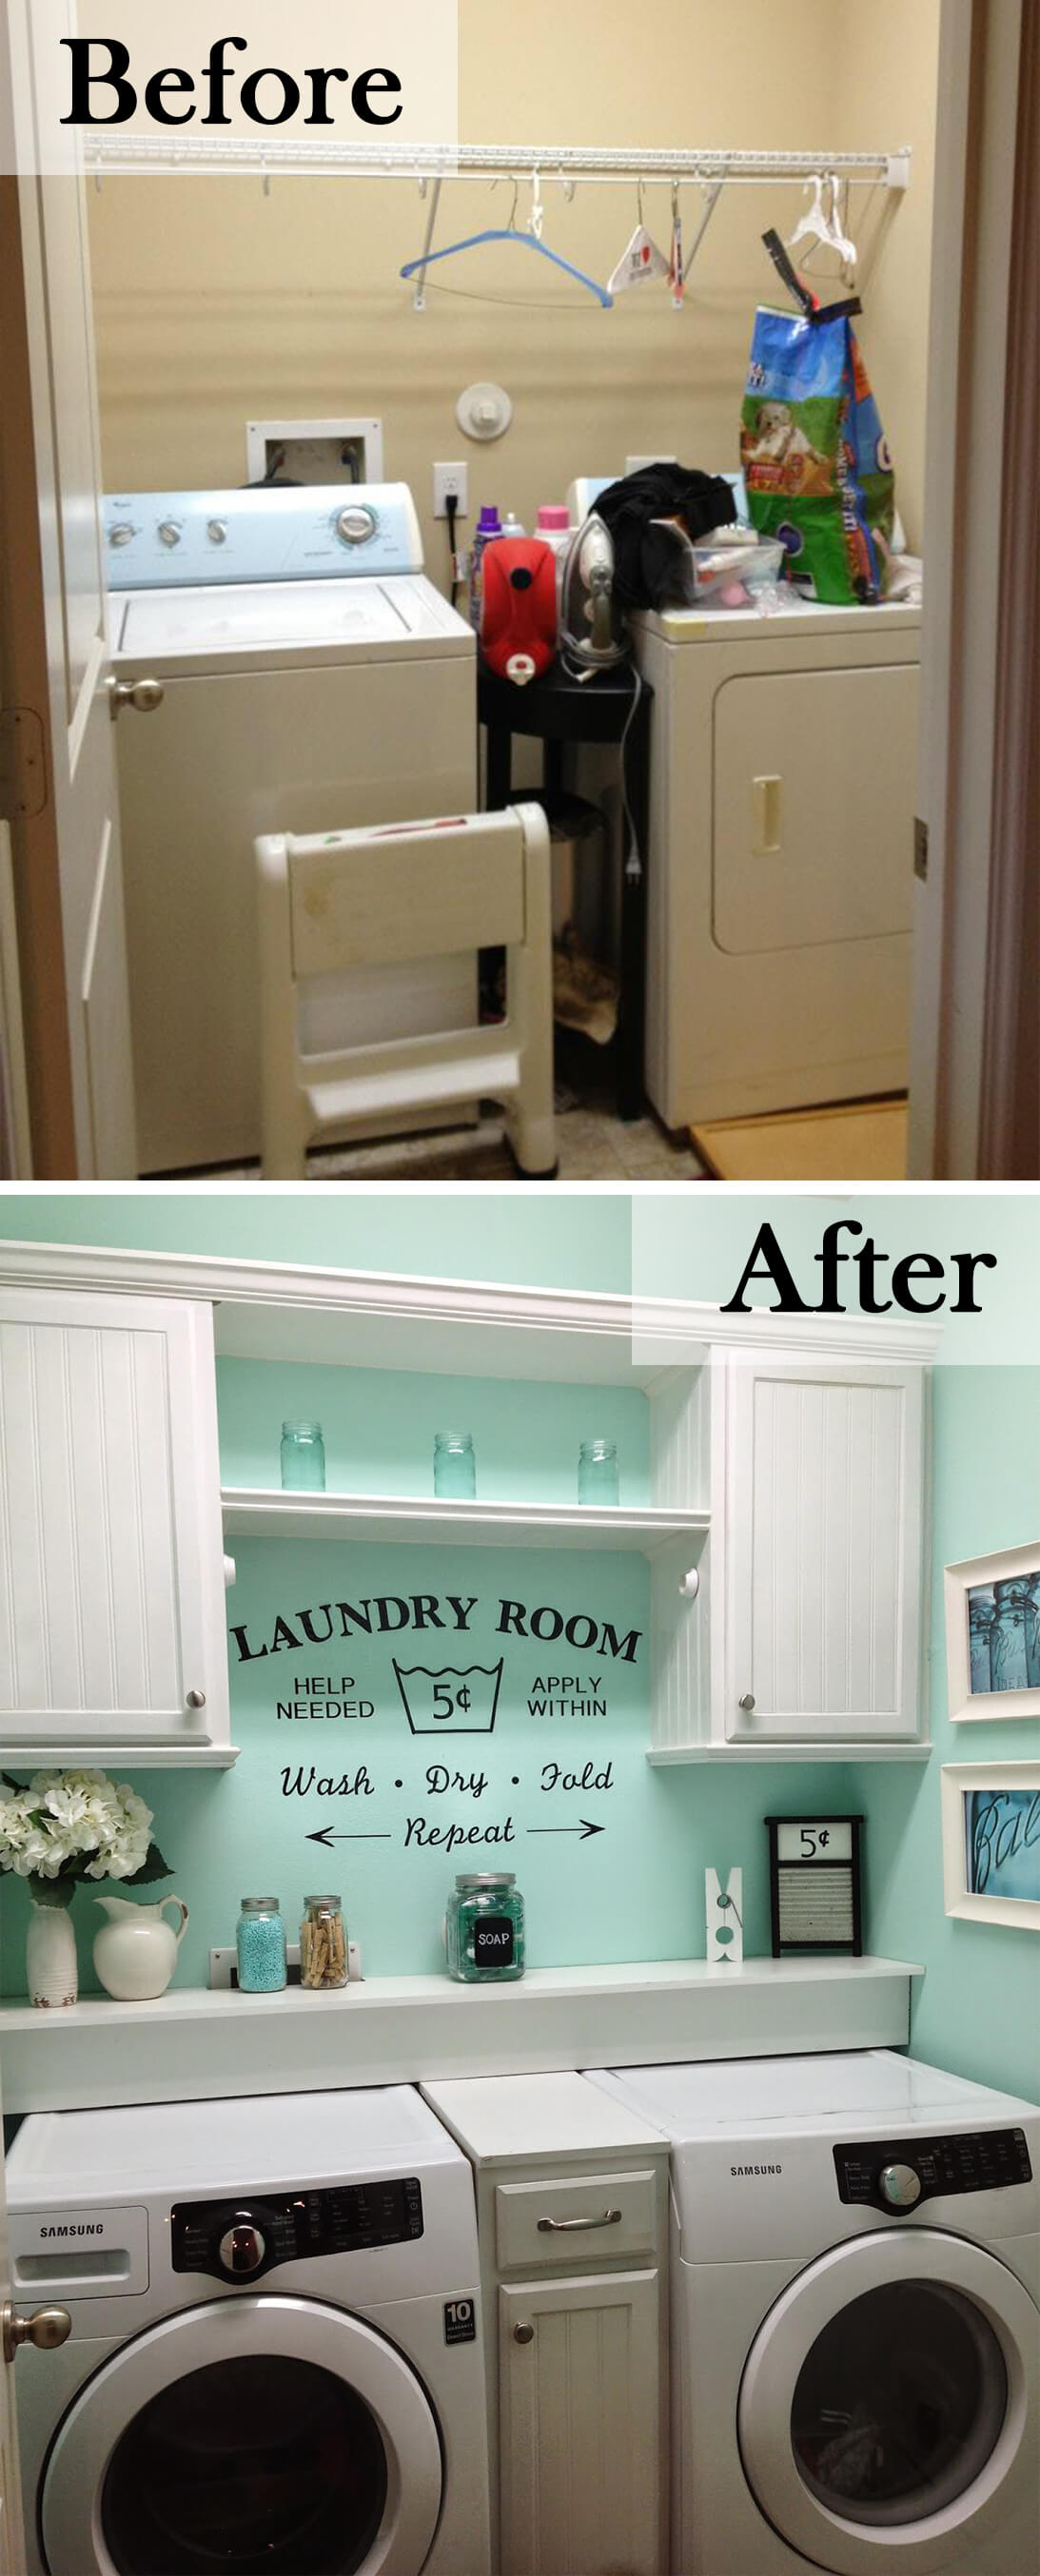 23 Best Budget Friendly Laundry Room Makeover Ideas and Designs for 2017